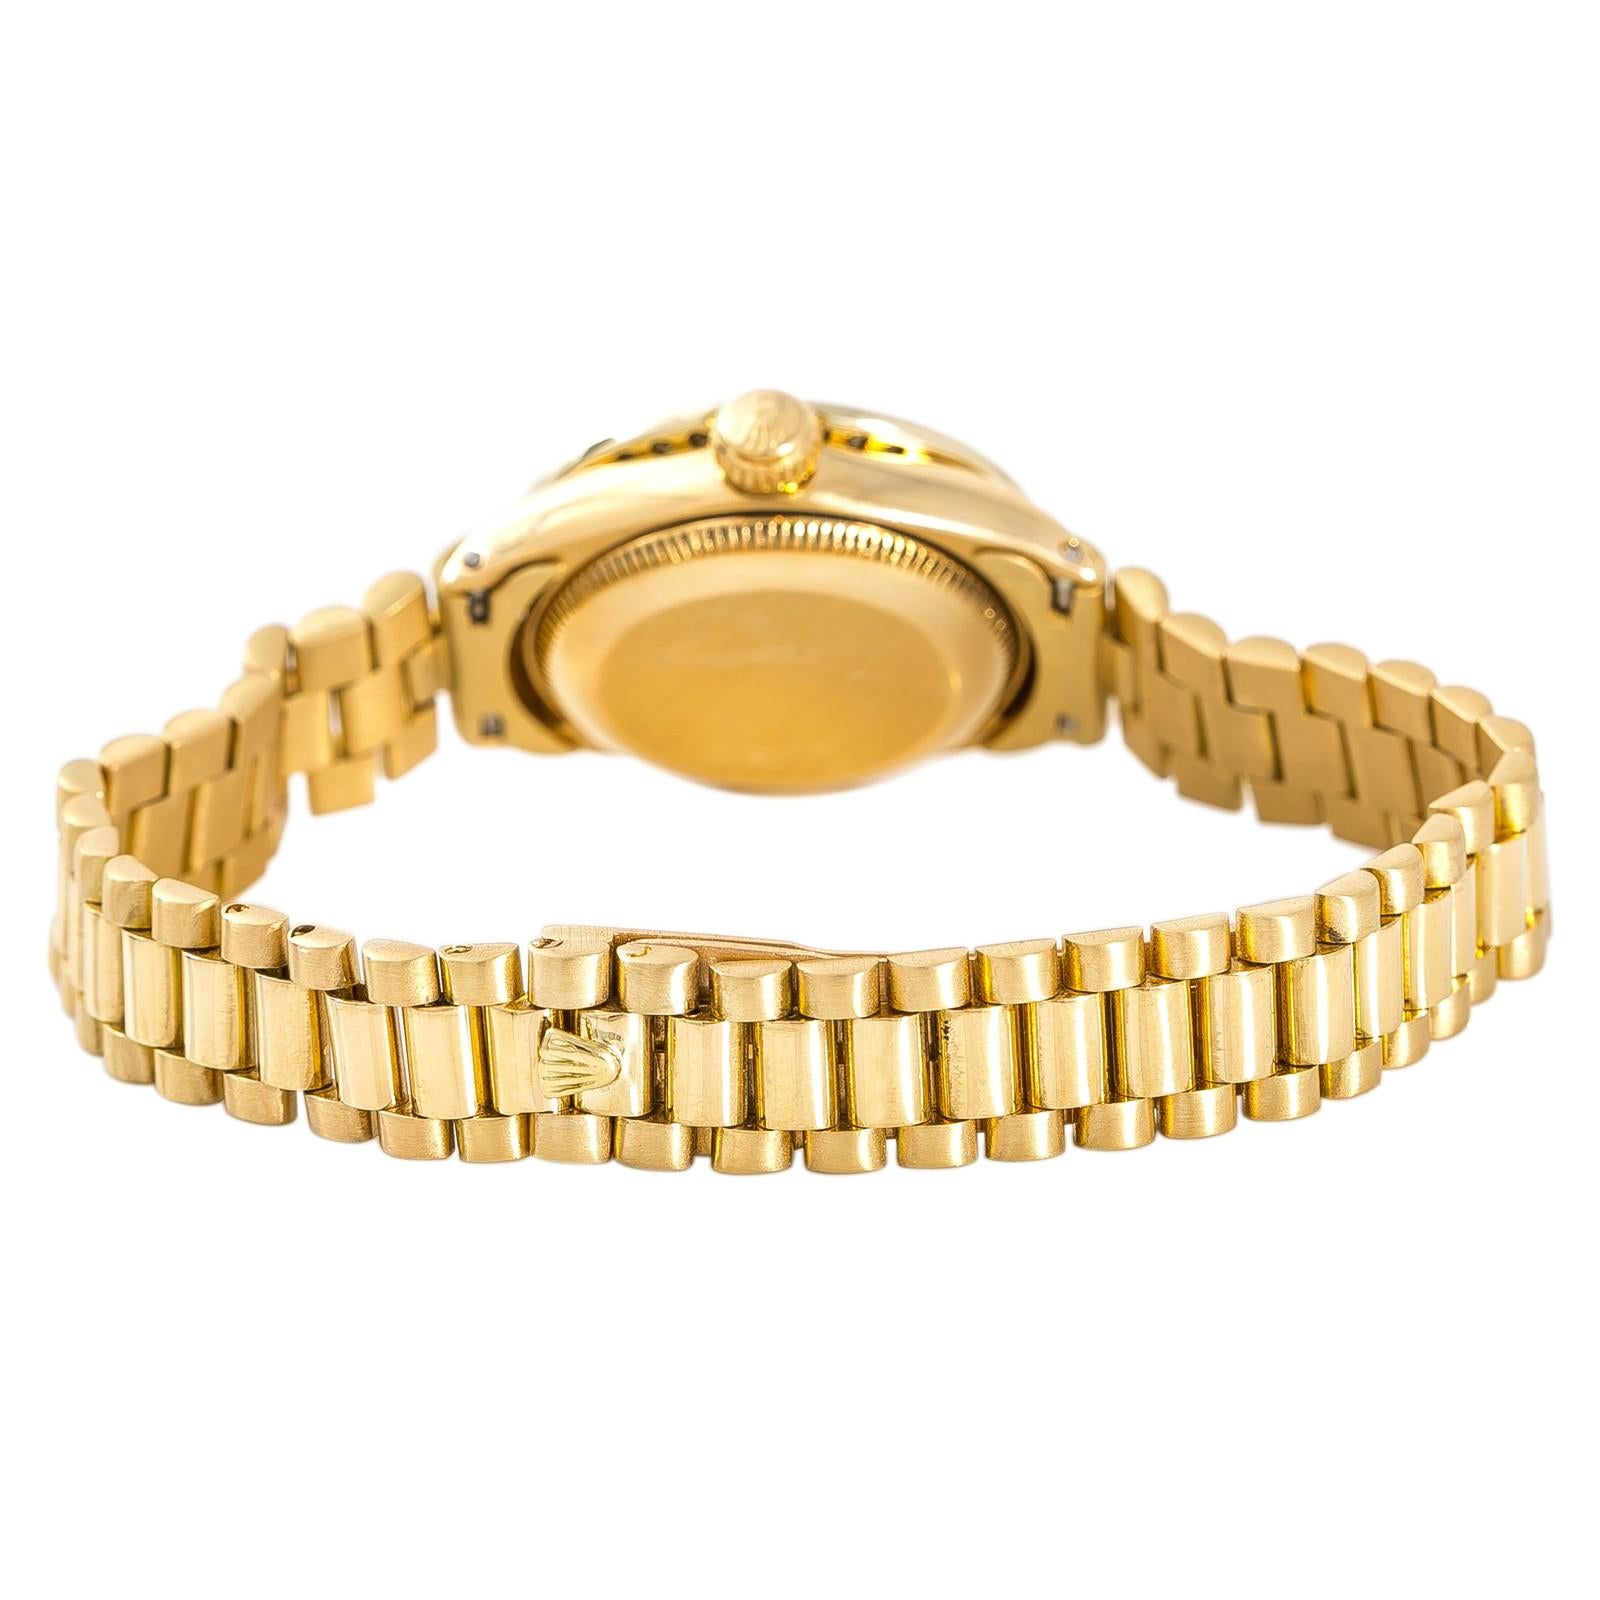 Rolex Datejust Reference #:6517. Rolex Datejust 6517 Womens Automatic Watch 18K Yellow Gold 1.75CT 26mm. Verified and Certified by WatchFacts. 1 year warranty offered by WatchFacts.
